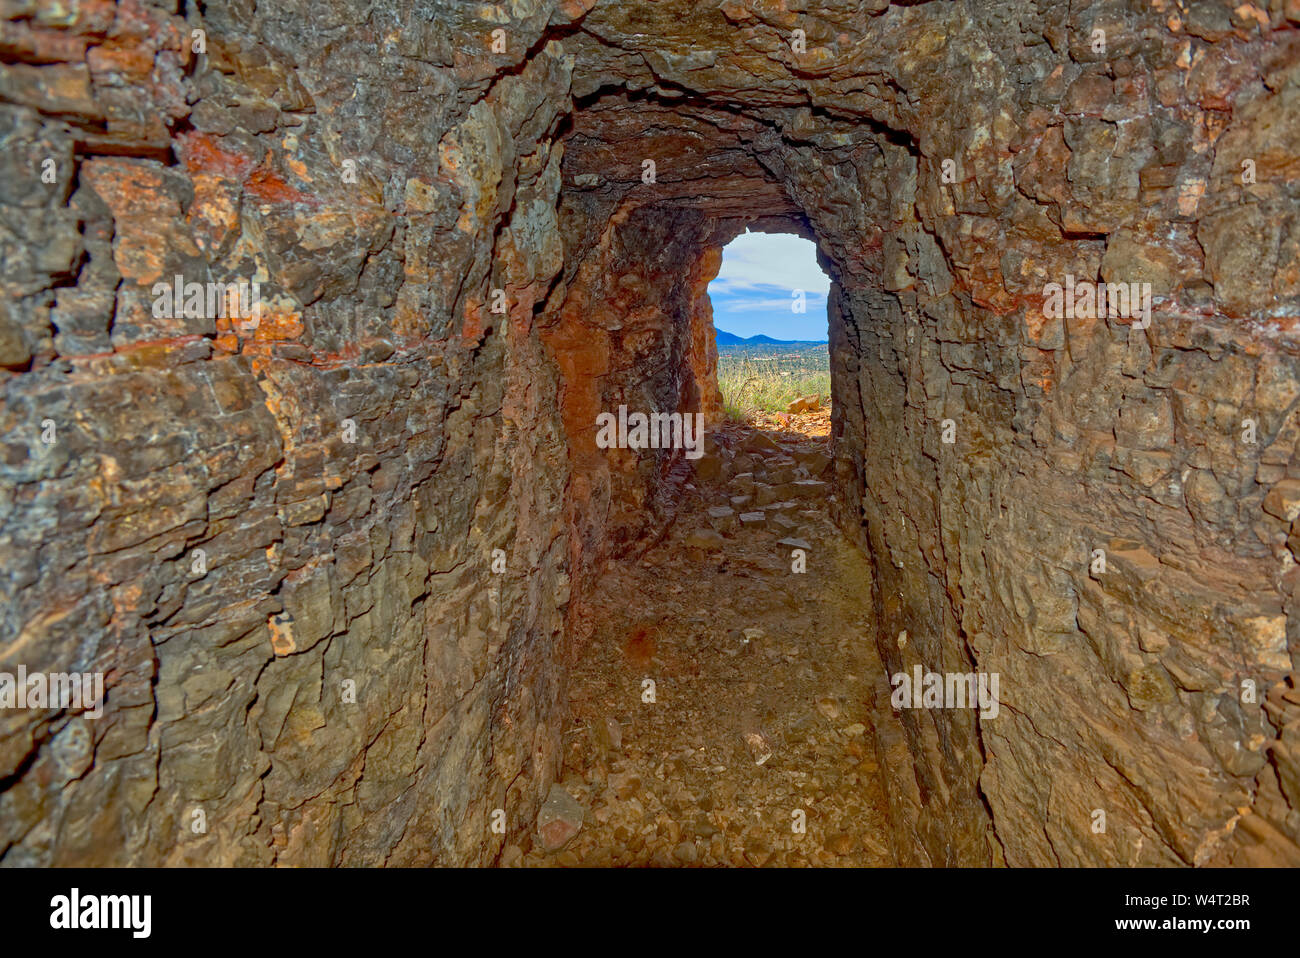 View from an abandoned mine shaft, Sullivan Butte, Chino Valley, Arizona, United States Stock Photo